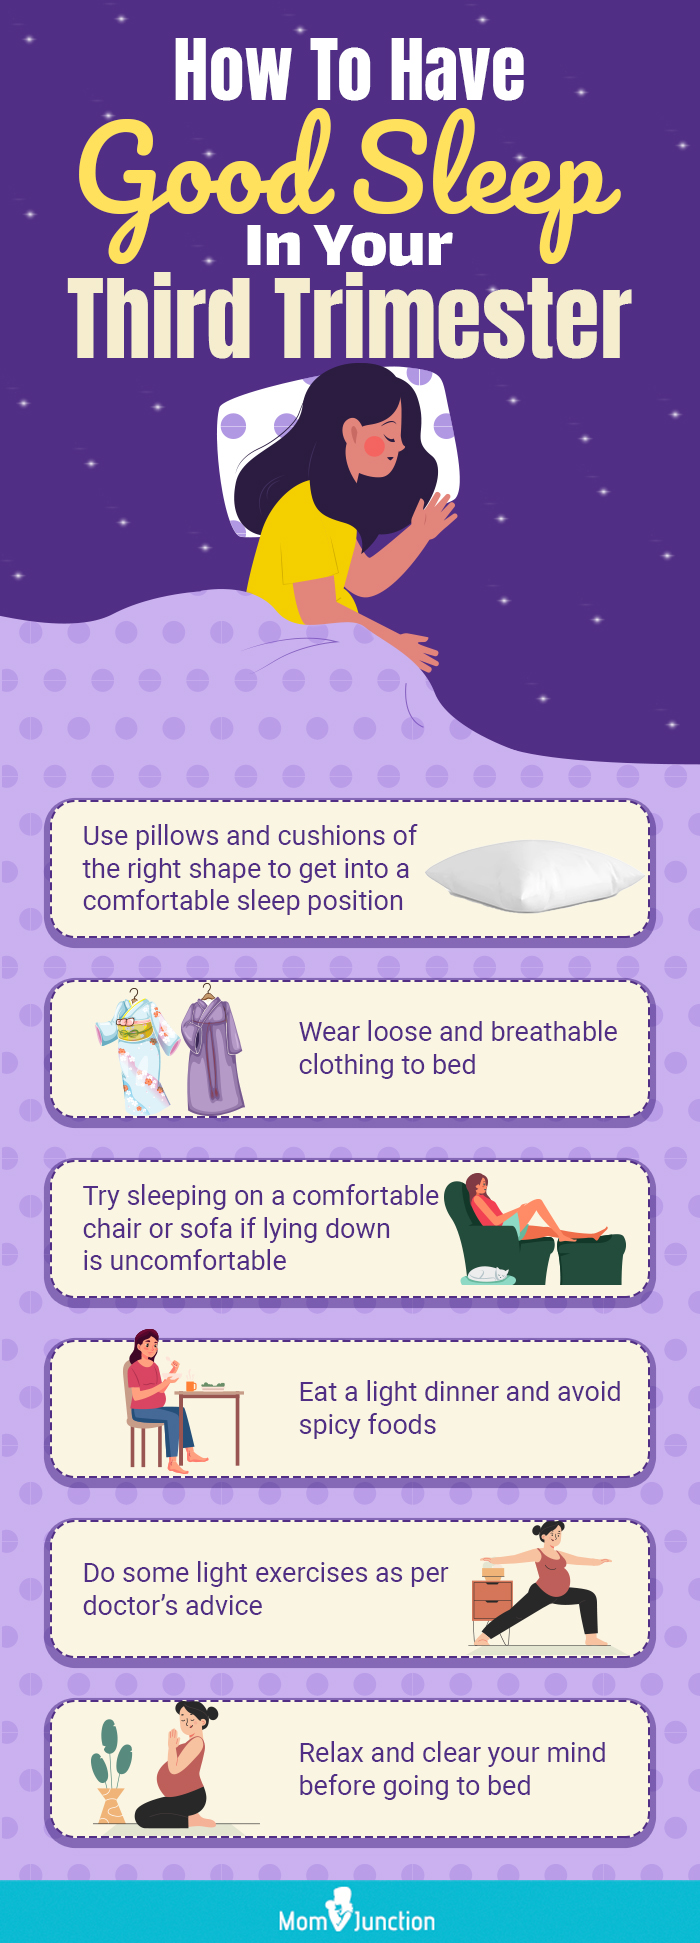 how to have good sleep in your third trimester (infographic)